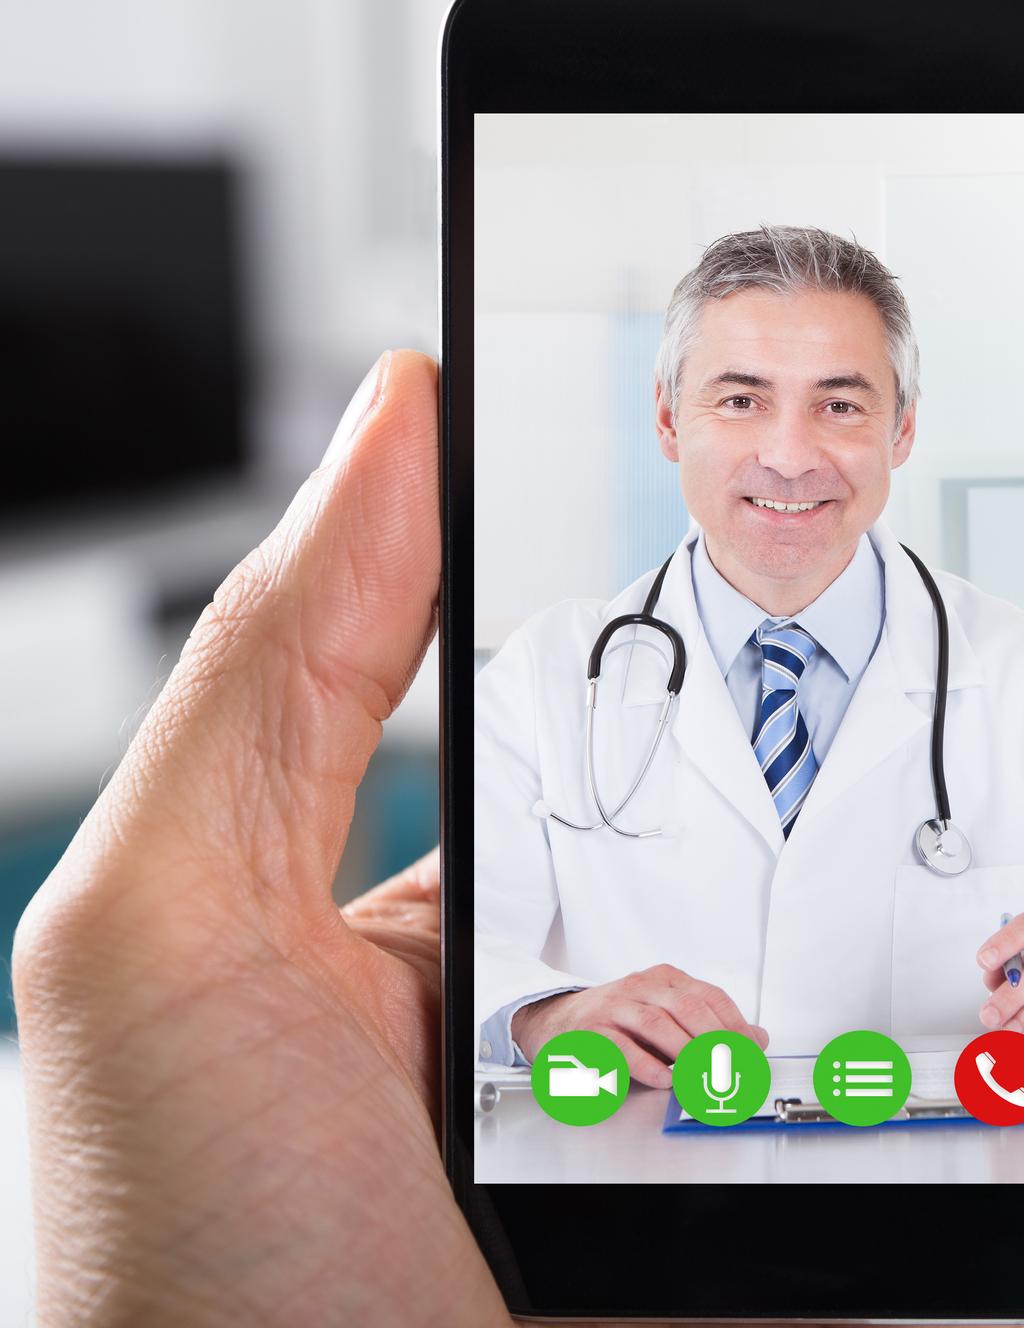 TELEHEALTH SOFTWARE Howard Medical has joined forces with AMD Global Telemedicine to address some of the toughest challenges in the healthcare industry today insufficient access to care, limited